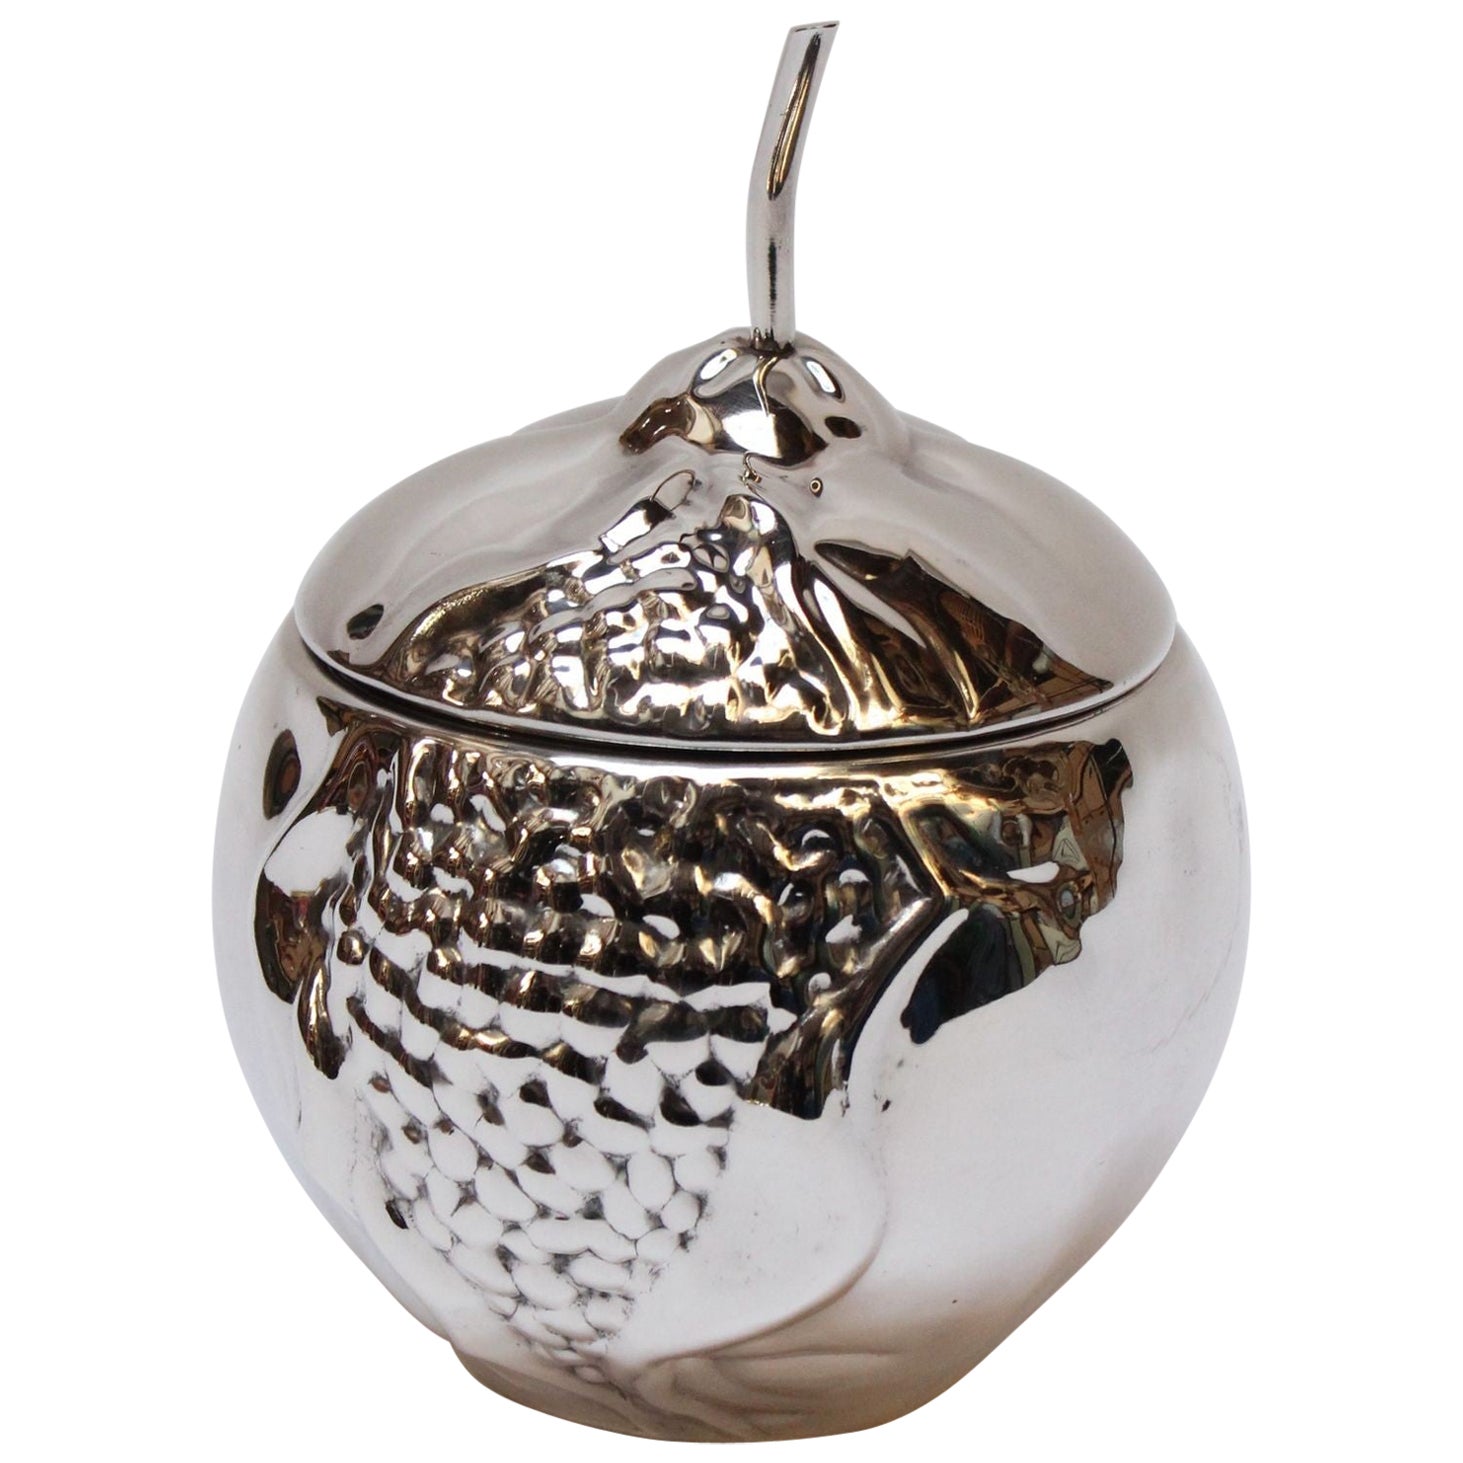 Italian Modernist Silver-Plated Insulated "Pomegranate" Ice Bucket by Teghini For Sale